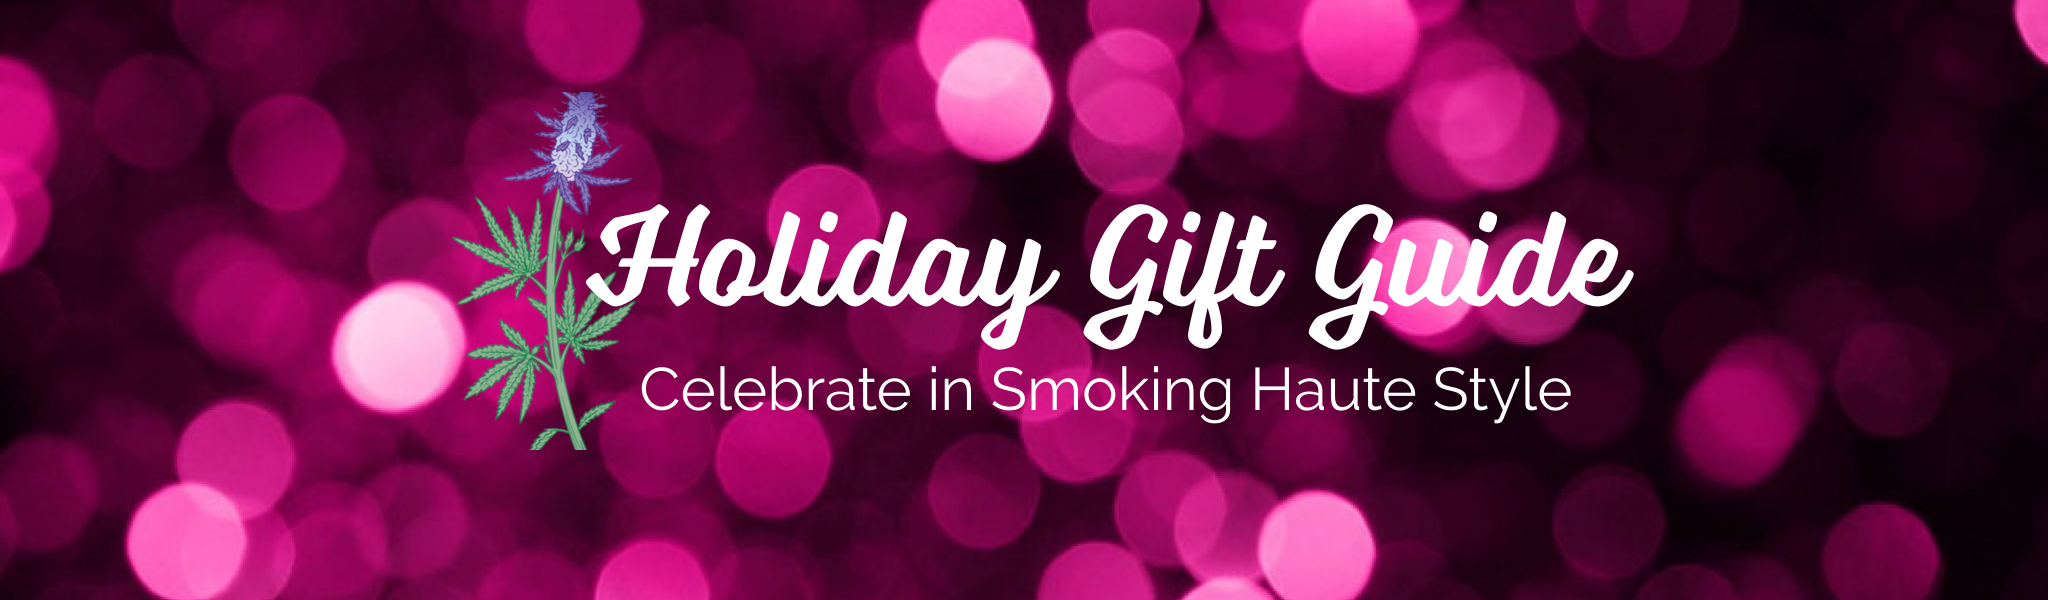 Flower Stampede Holiday Gift Guide Smoking Haute Gifts